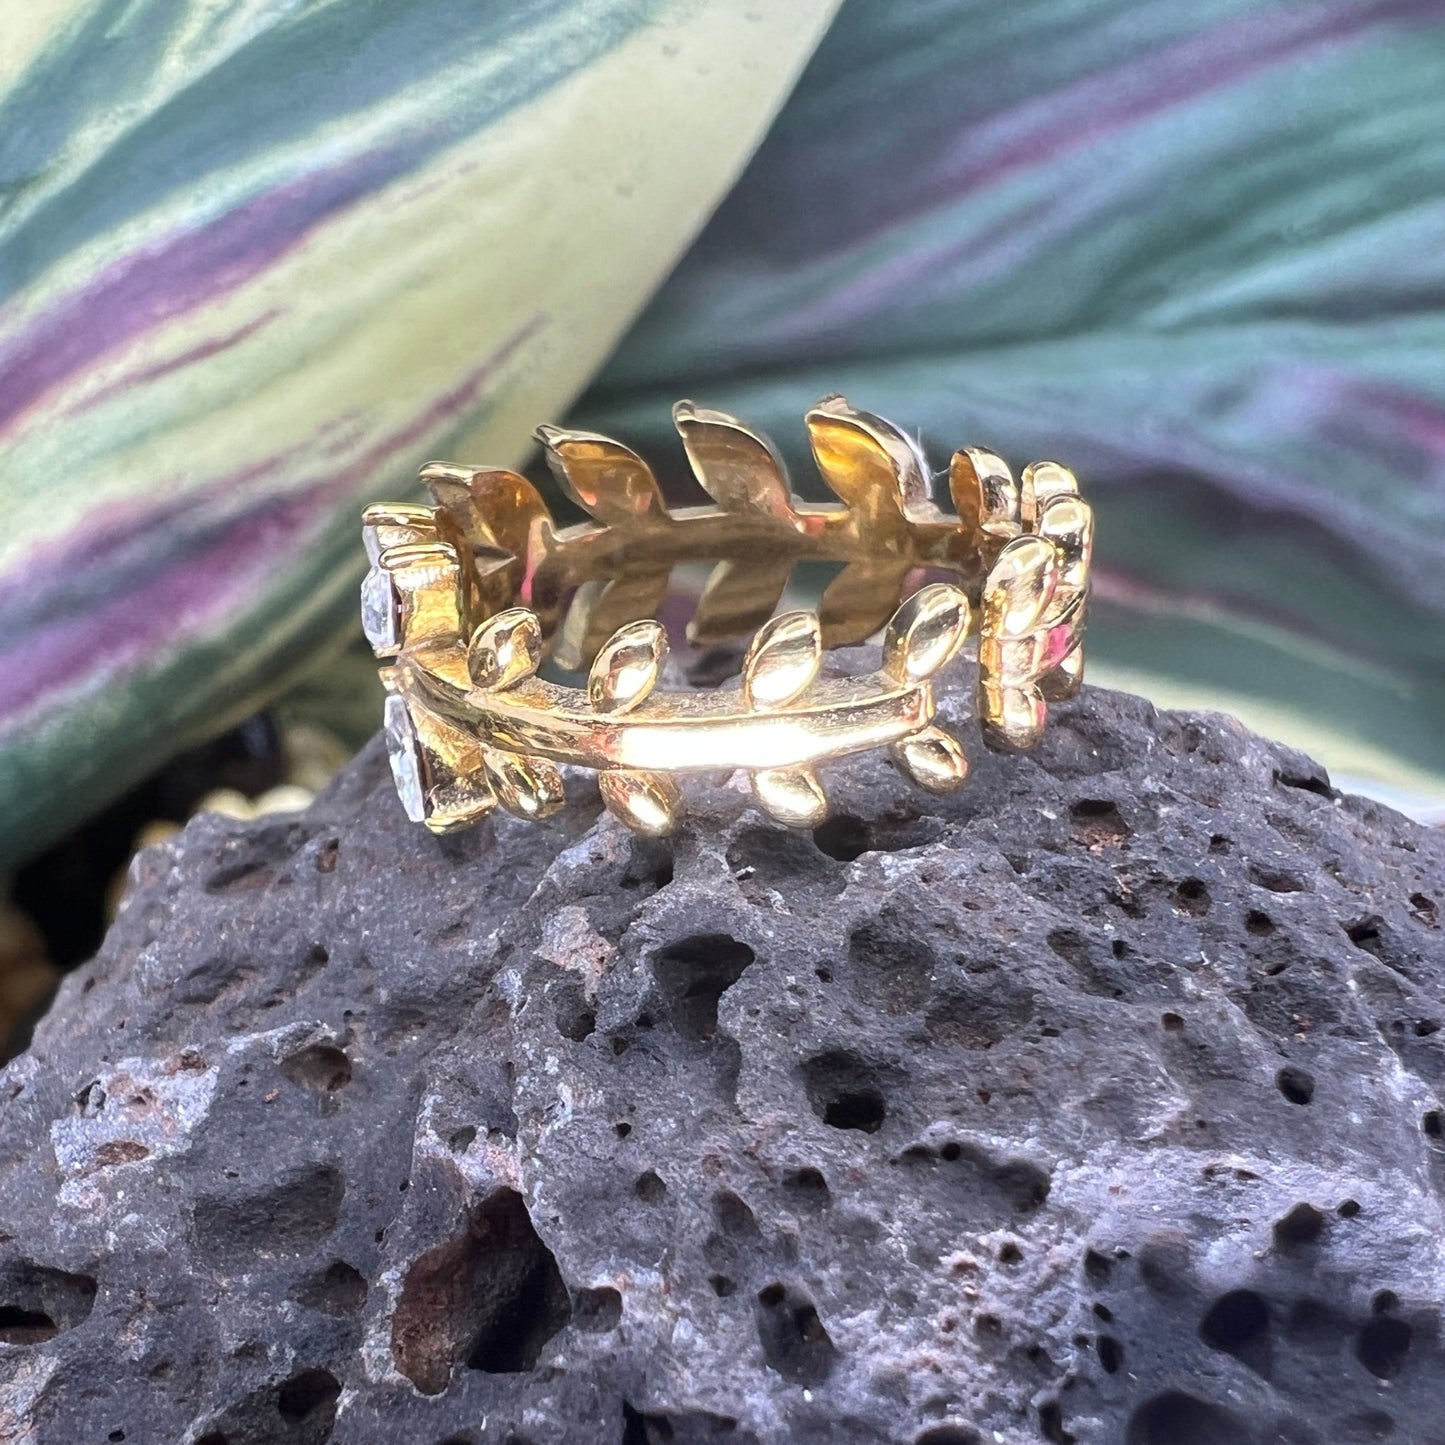 Maile Cubic Zirconia Band